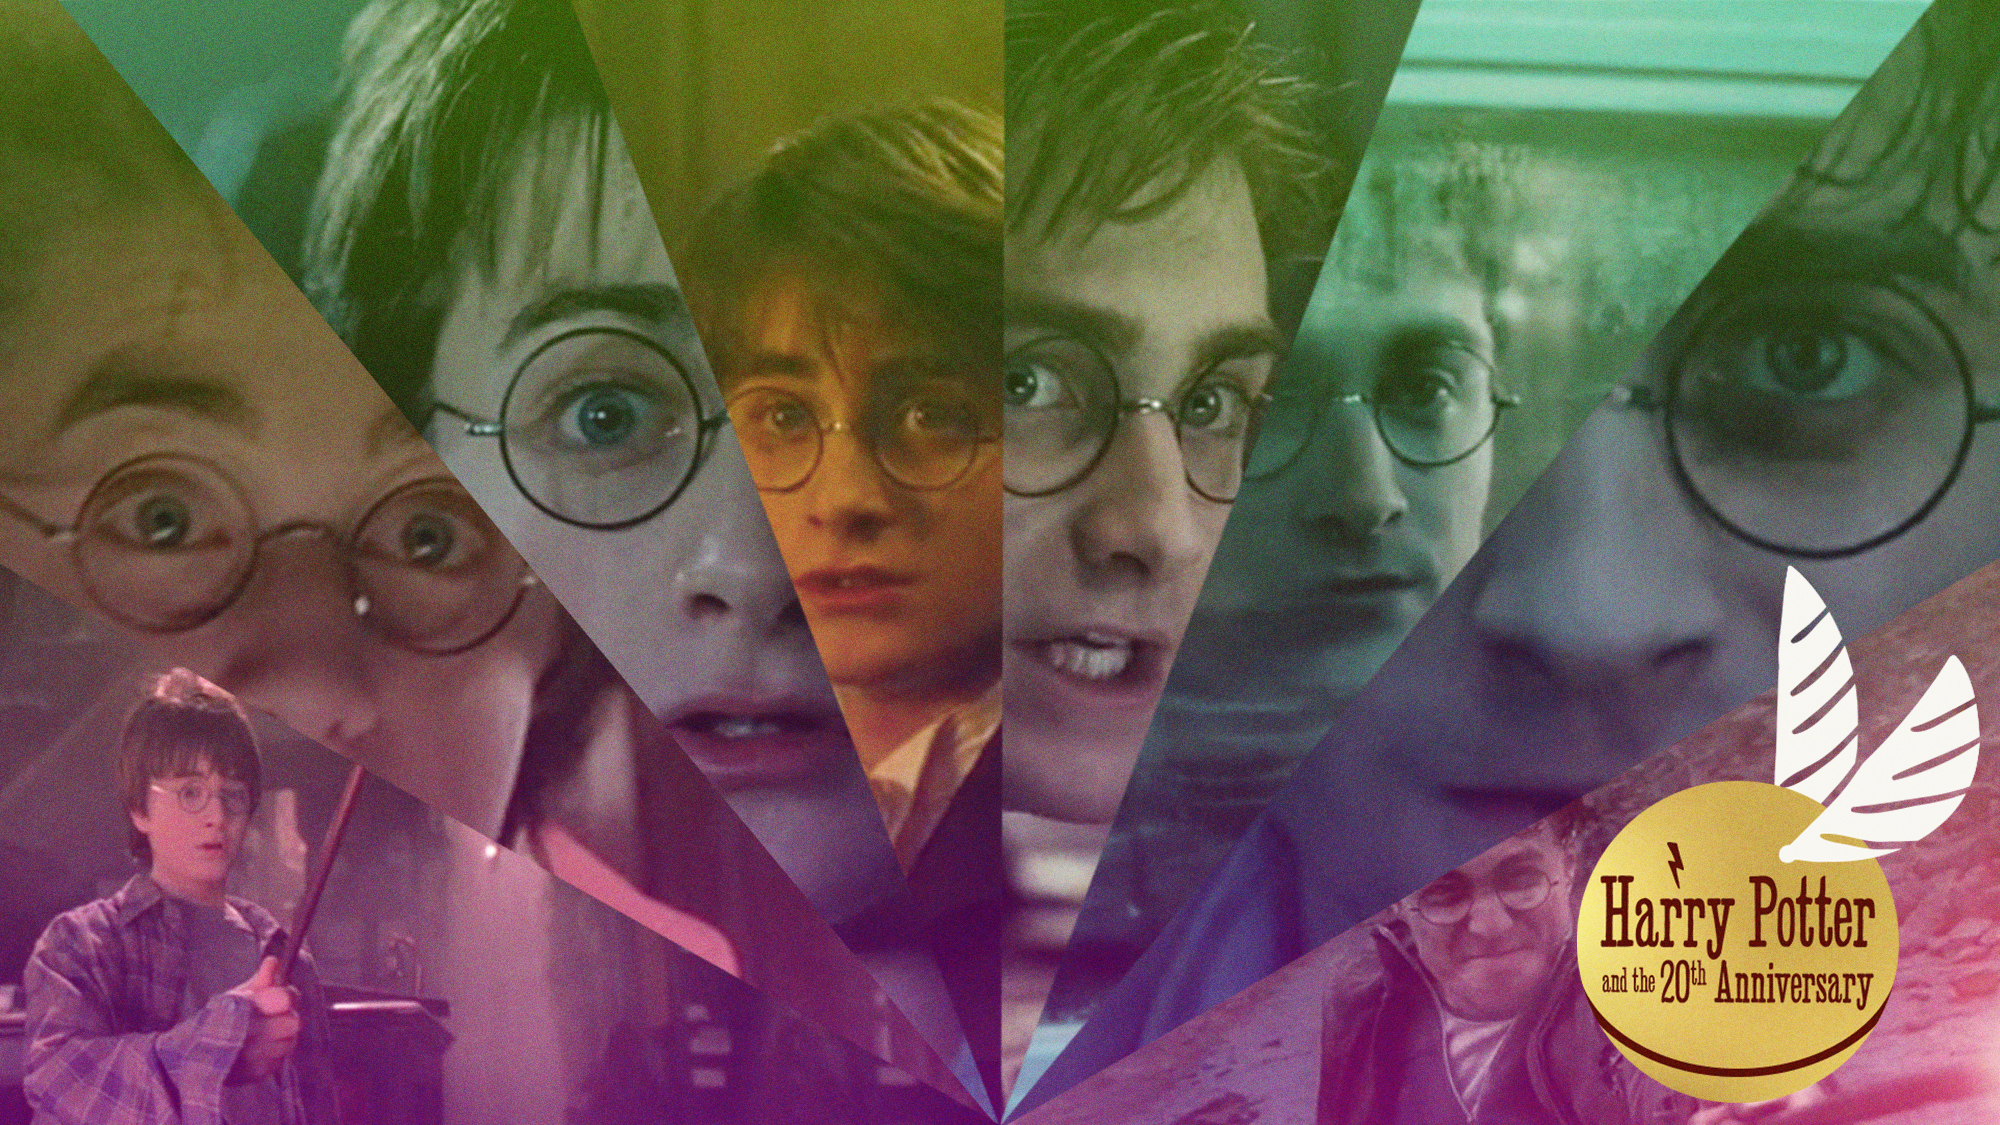 Every Harry Potter movie, ranked by A.V. Club review